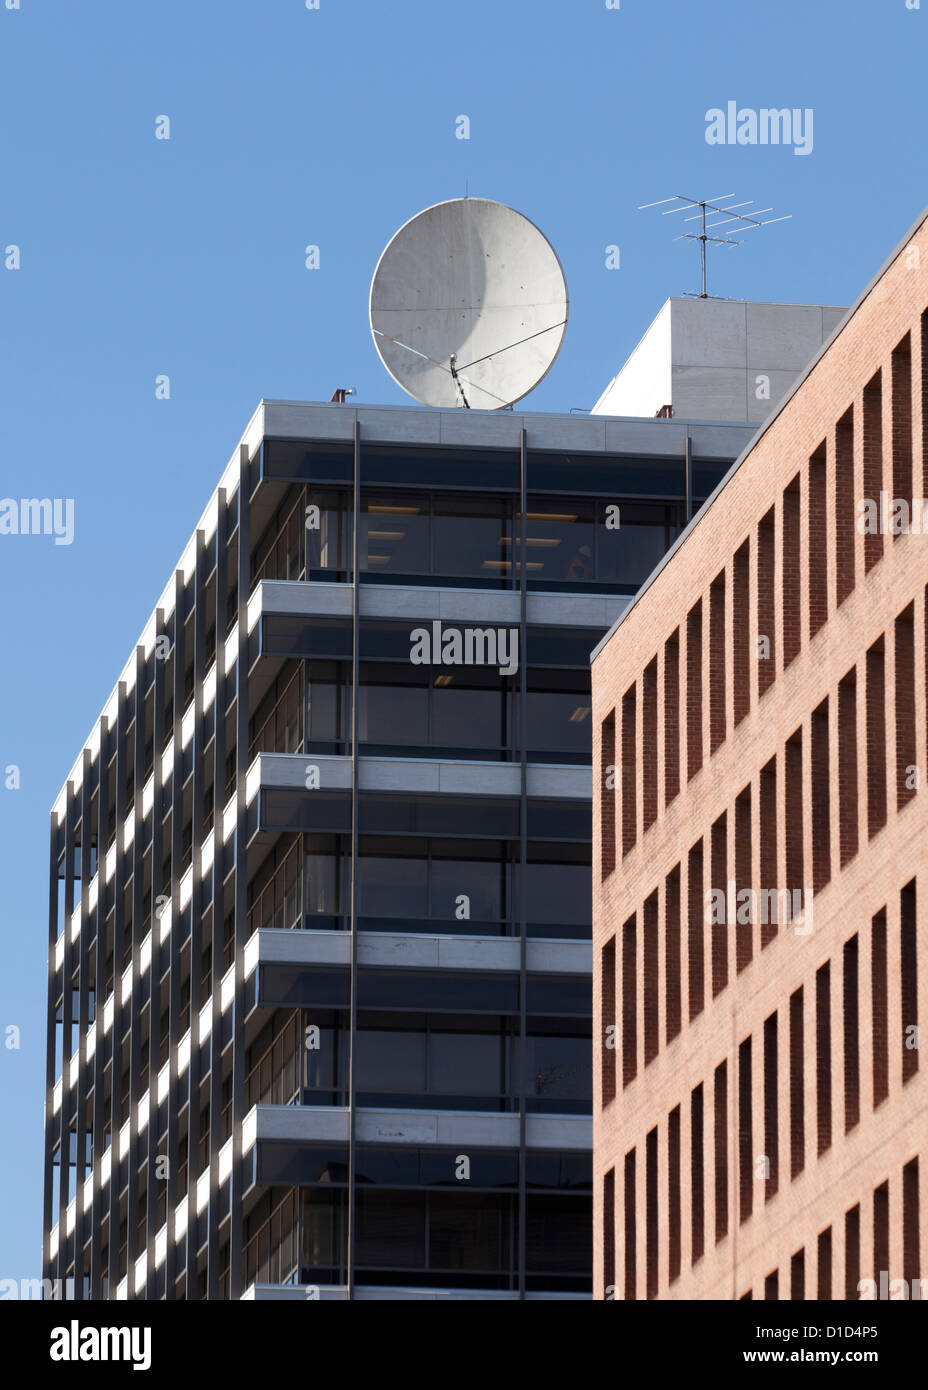 Communications satellite dish on top of building Stock Photo